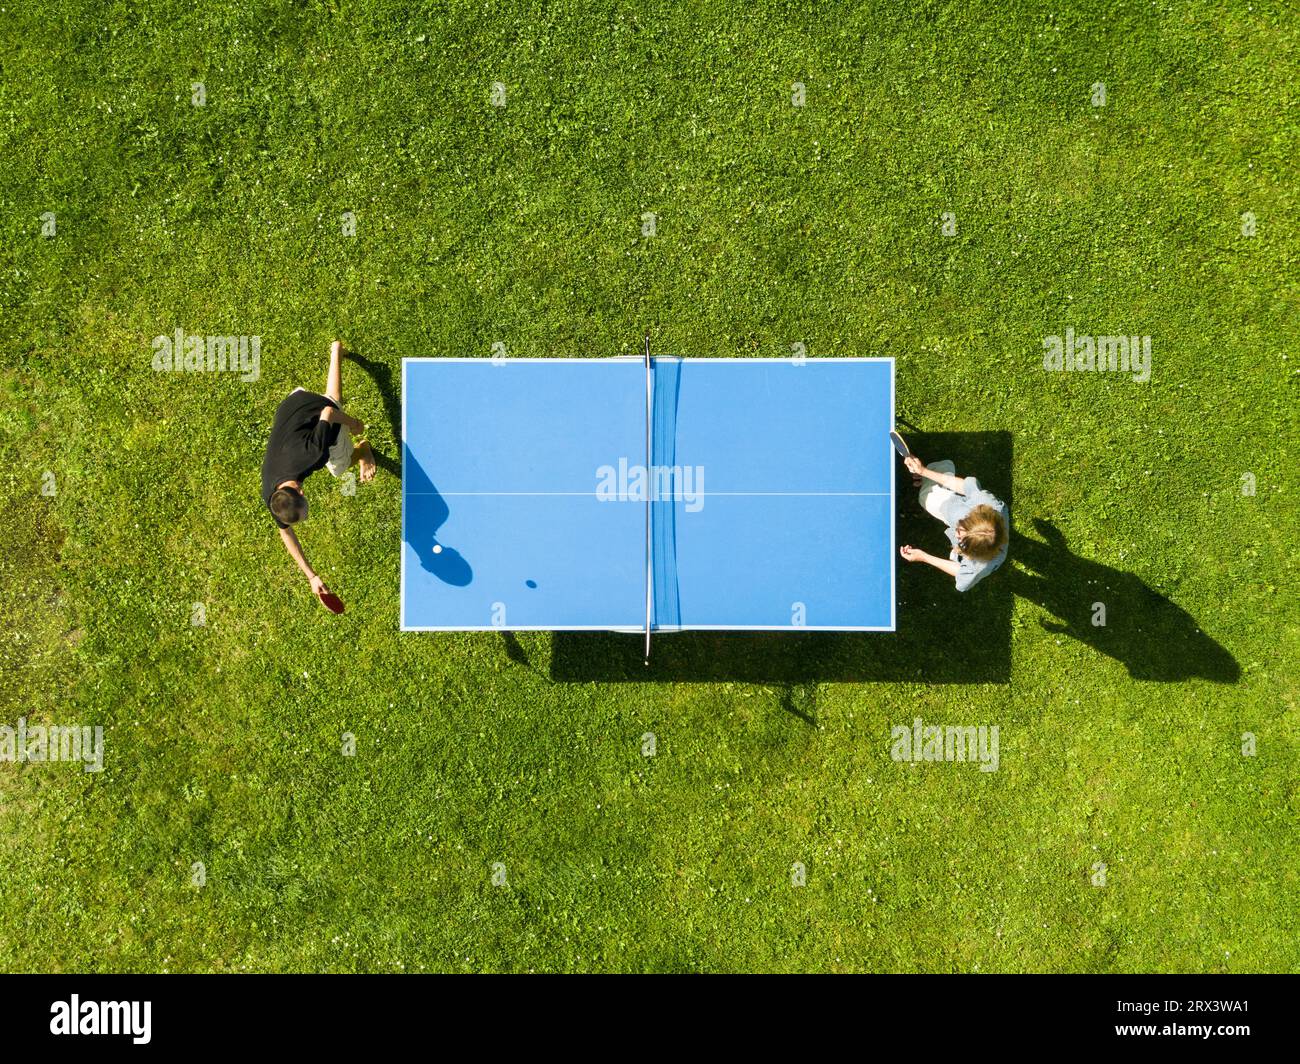 Aerial view people playing ping pong match outdoor. Top view two boys playing table tennis on a green grass lawn. Aerial view outdoor sport Stock Photo